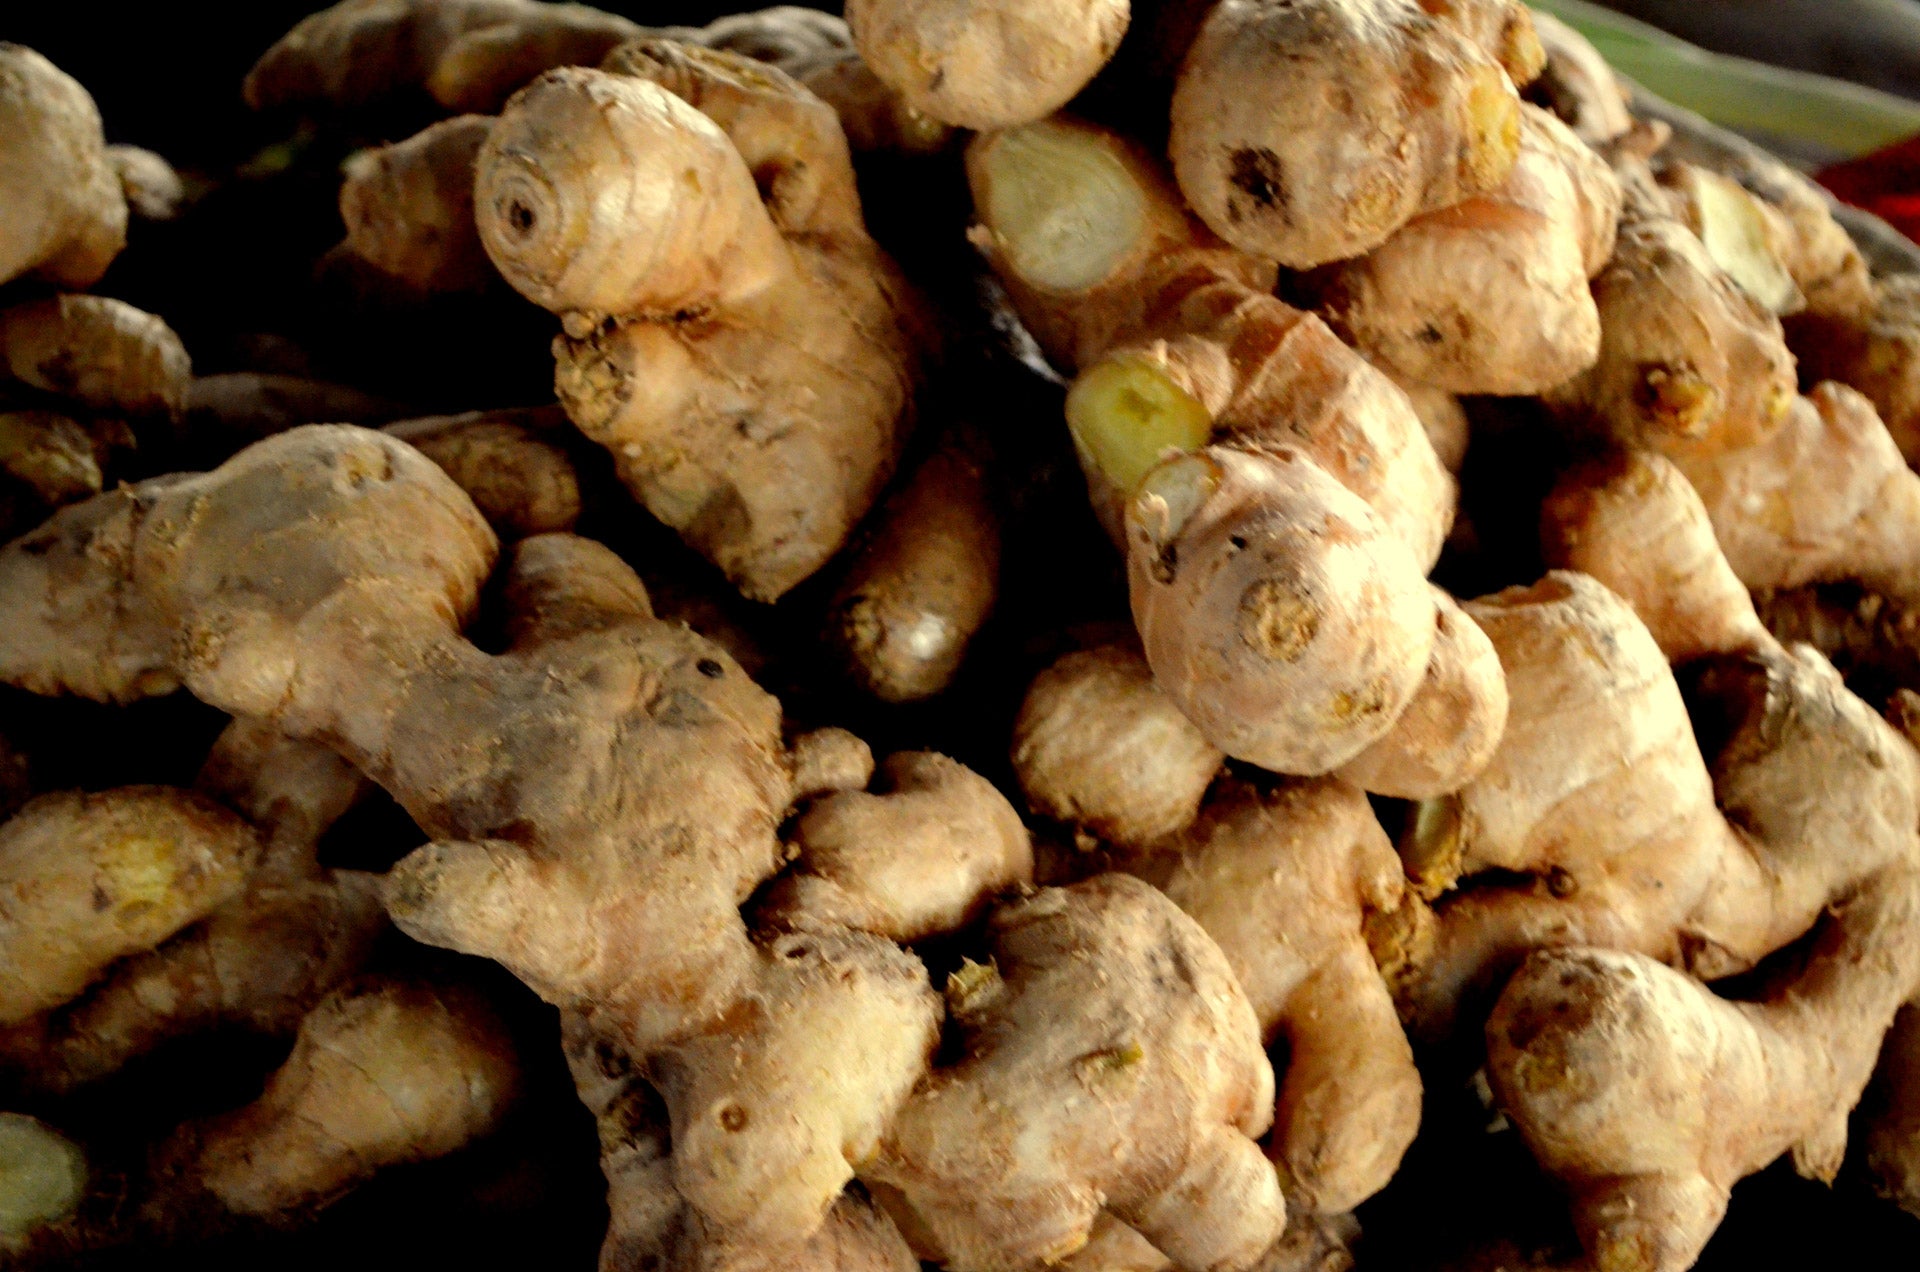 Ginger is a root with many uses in the modern day, from cooking to the use as an oil. Known for its many health benefits it is used for many different purposes.